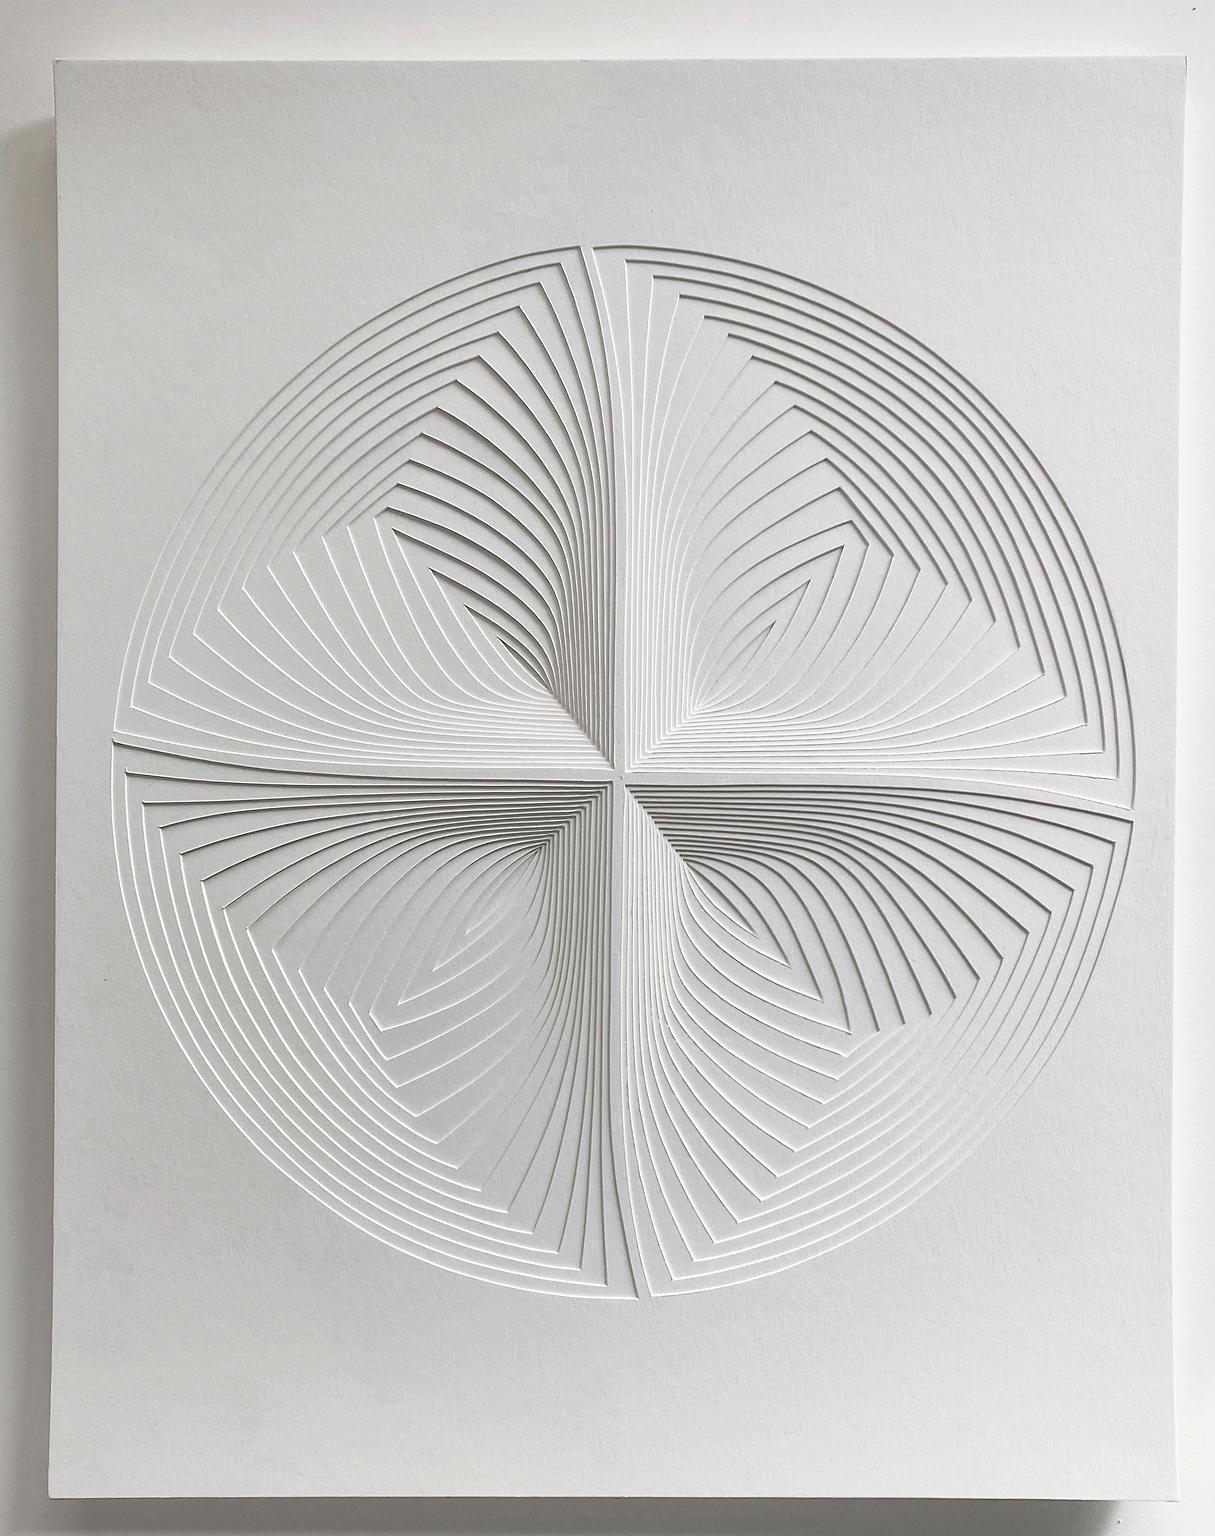 Elizabeth Gregory-Gruen Abstract Sculpture - "Circle Four Piece", Free Hand Cut Paper Wall Relief Sculpture, Abstract, White